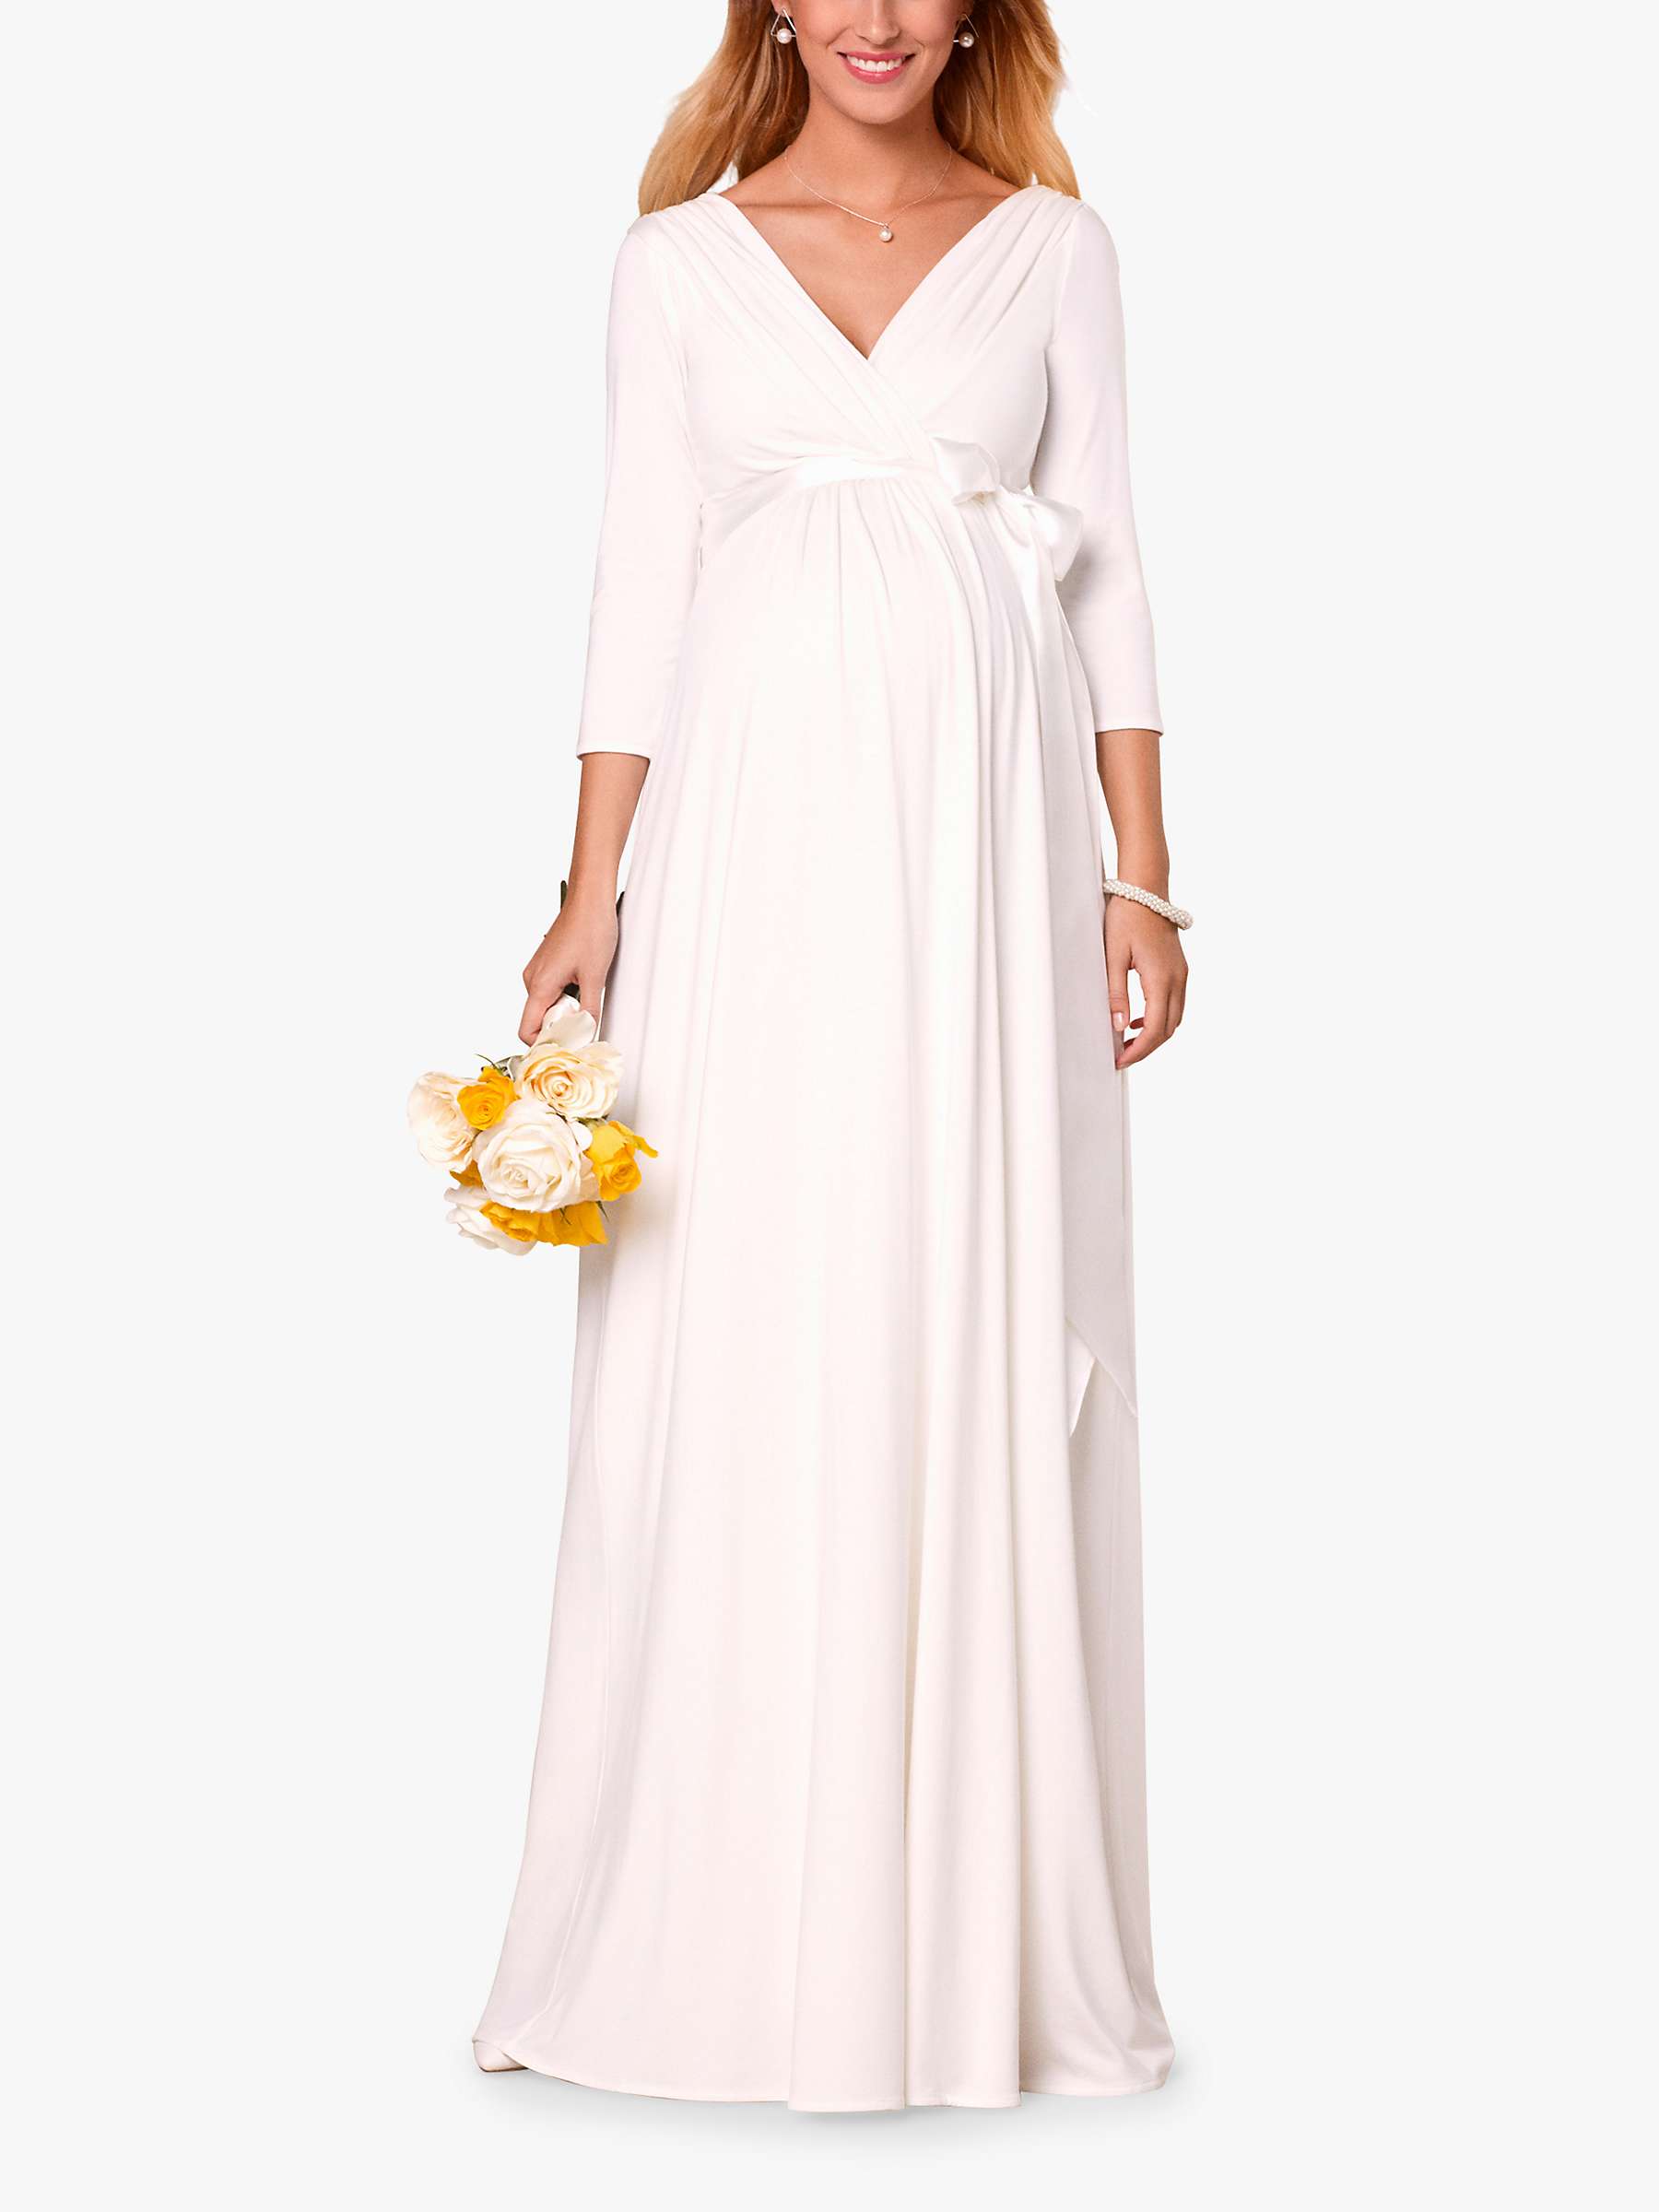 Buy Tiffany Rose Willow Maternity Wedding Dress, Ivory Online at johnlewis.com